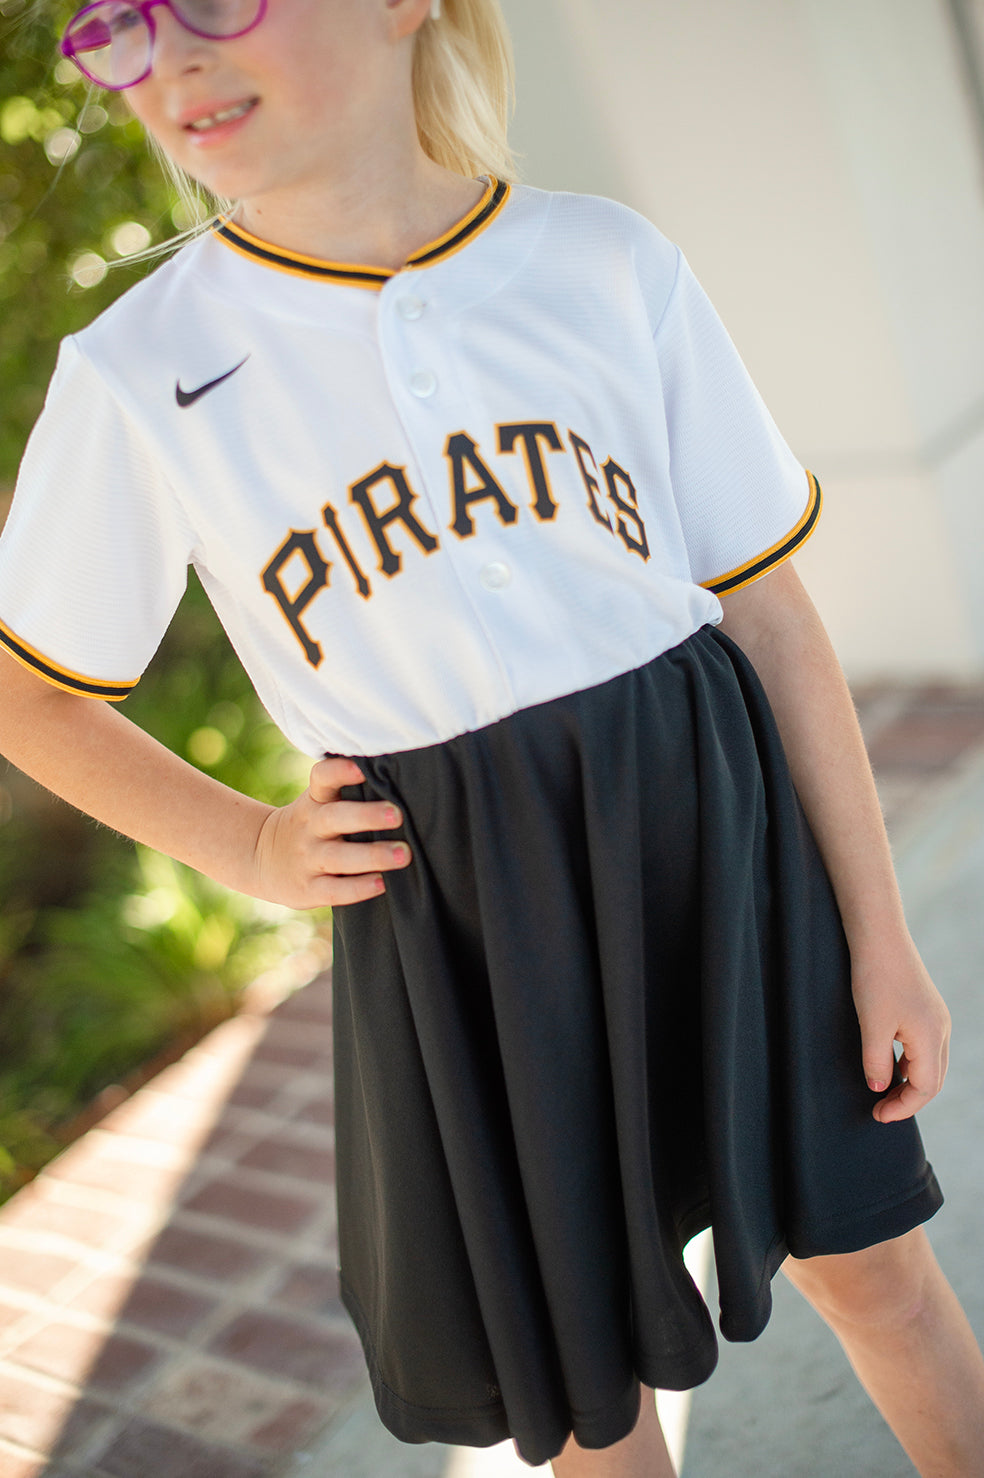 infant pittsburgh pirates apparel